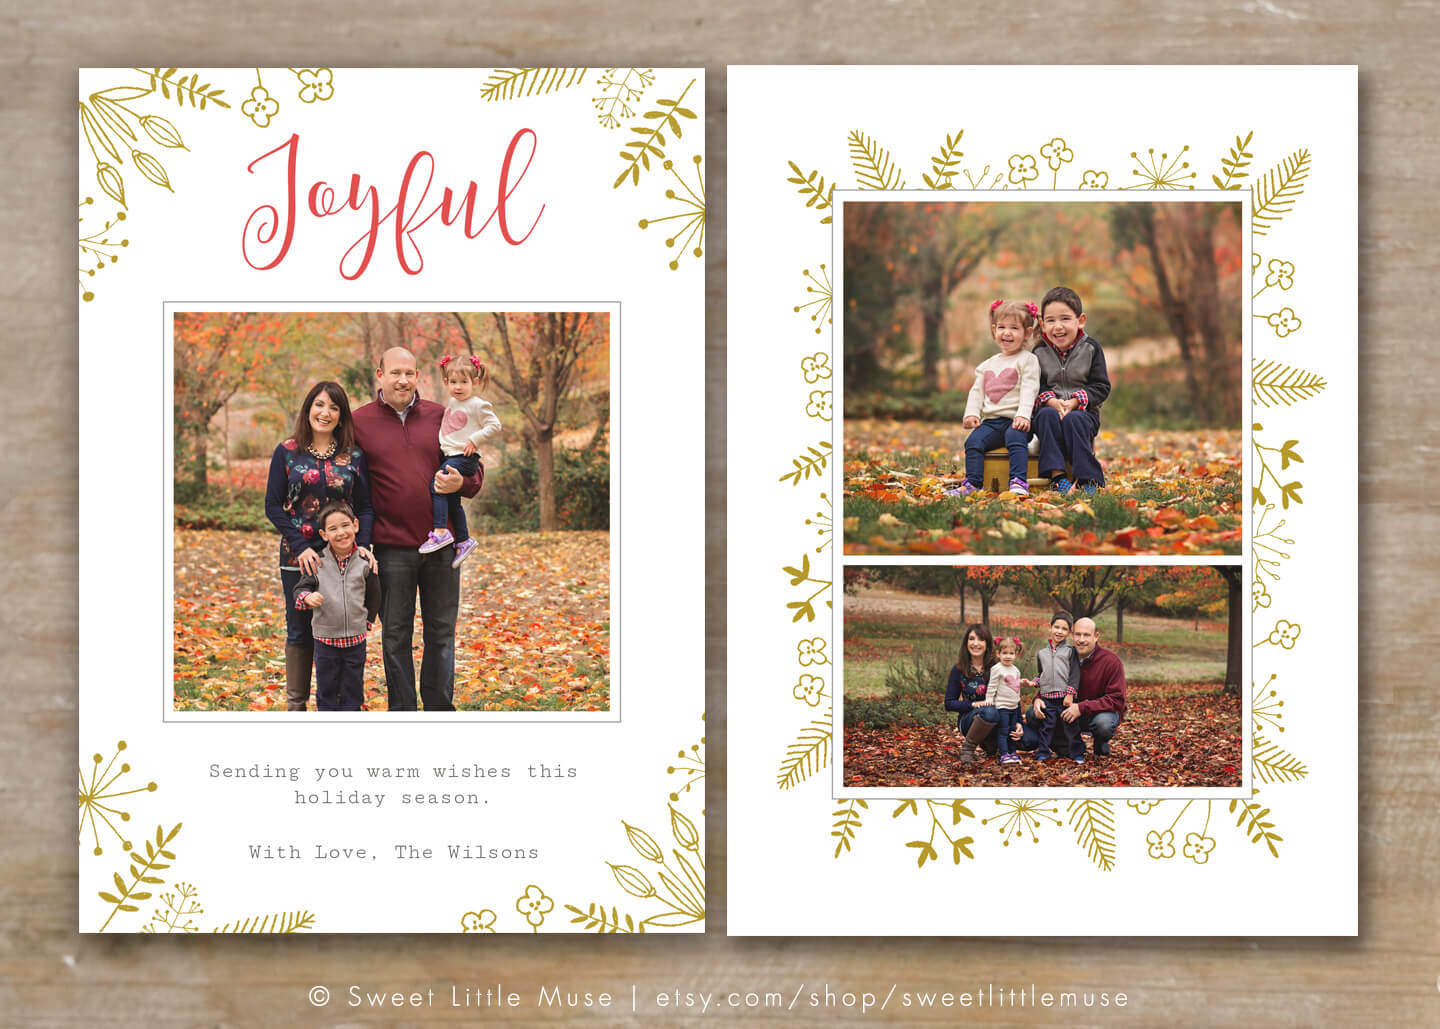 30 Holiday Card Templates For Photographers To Use This Year Regarding Holiday Card Templates For Photographers